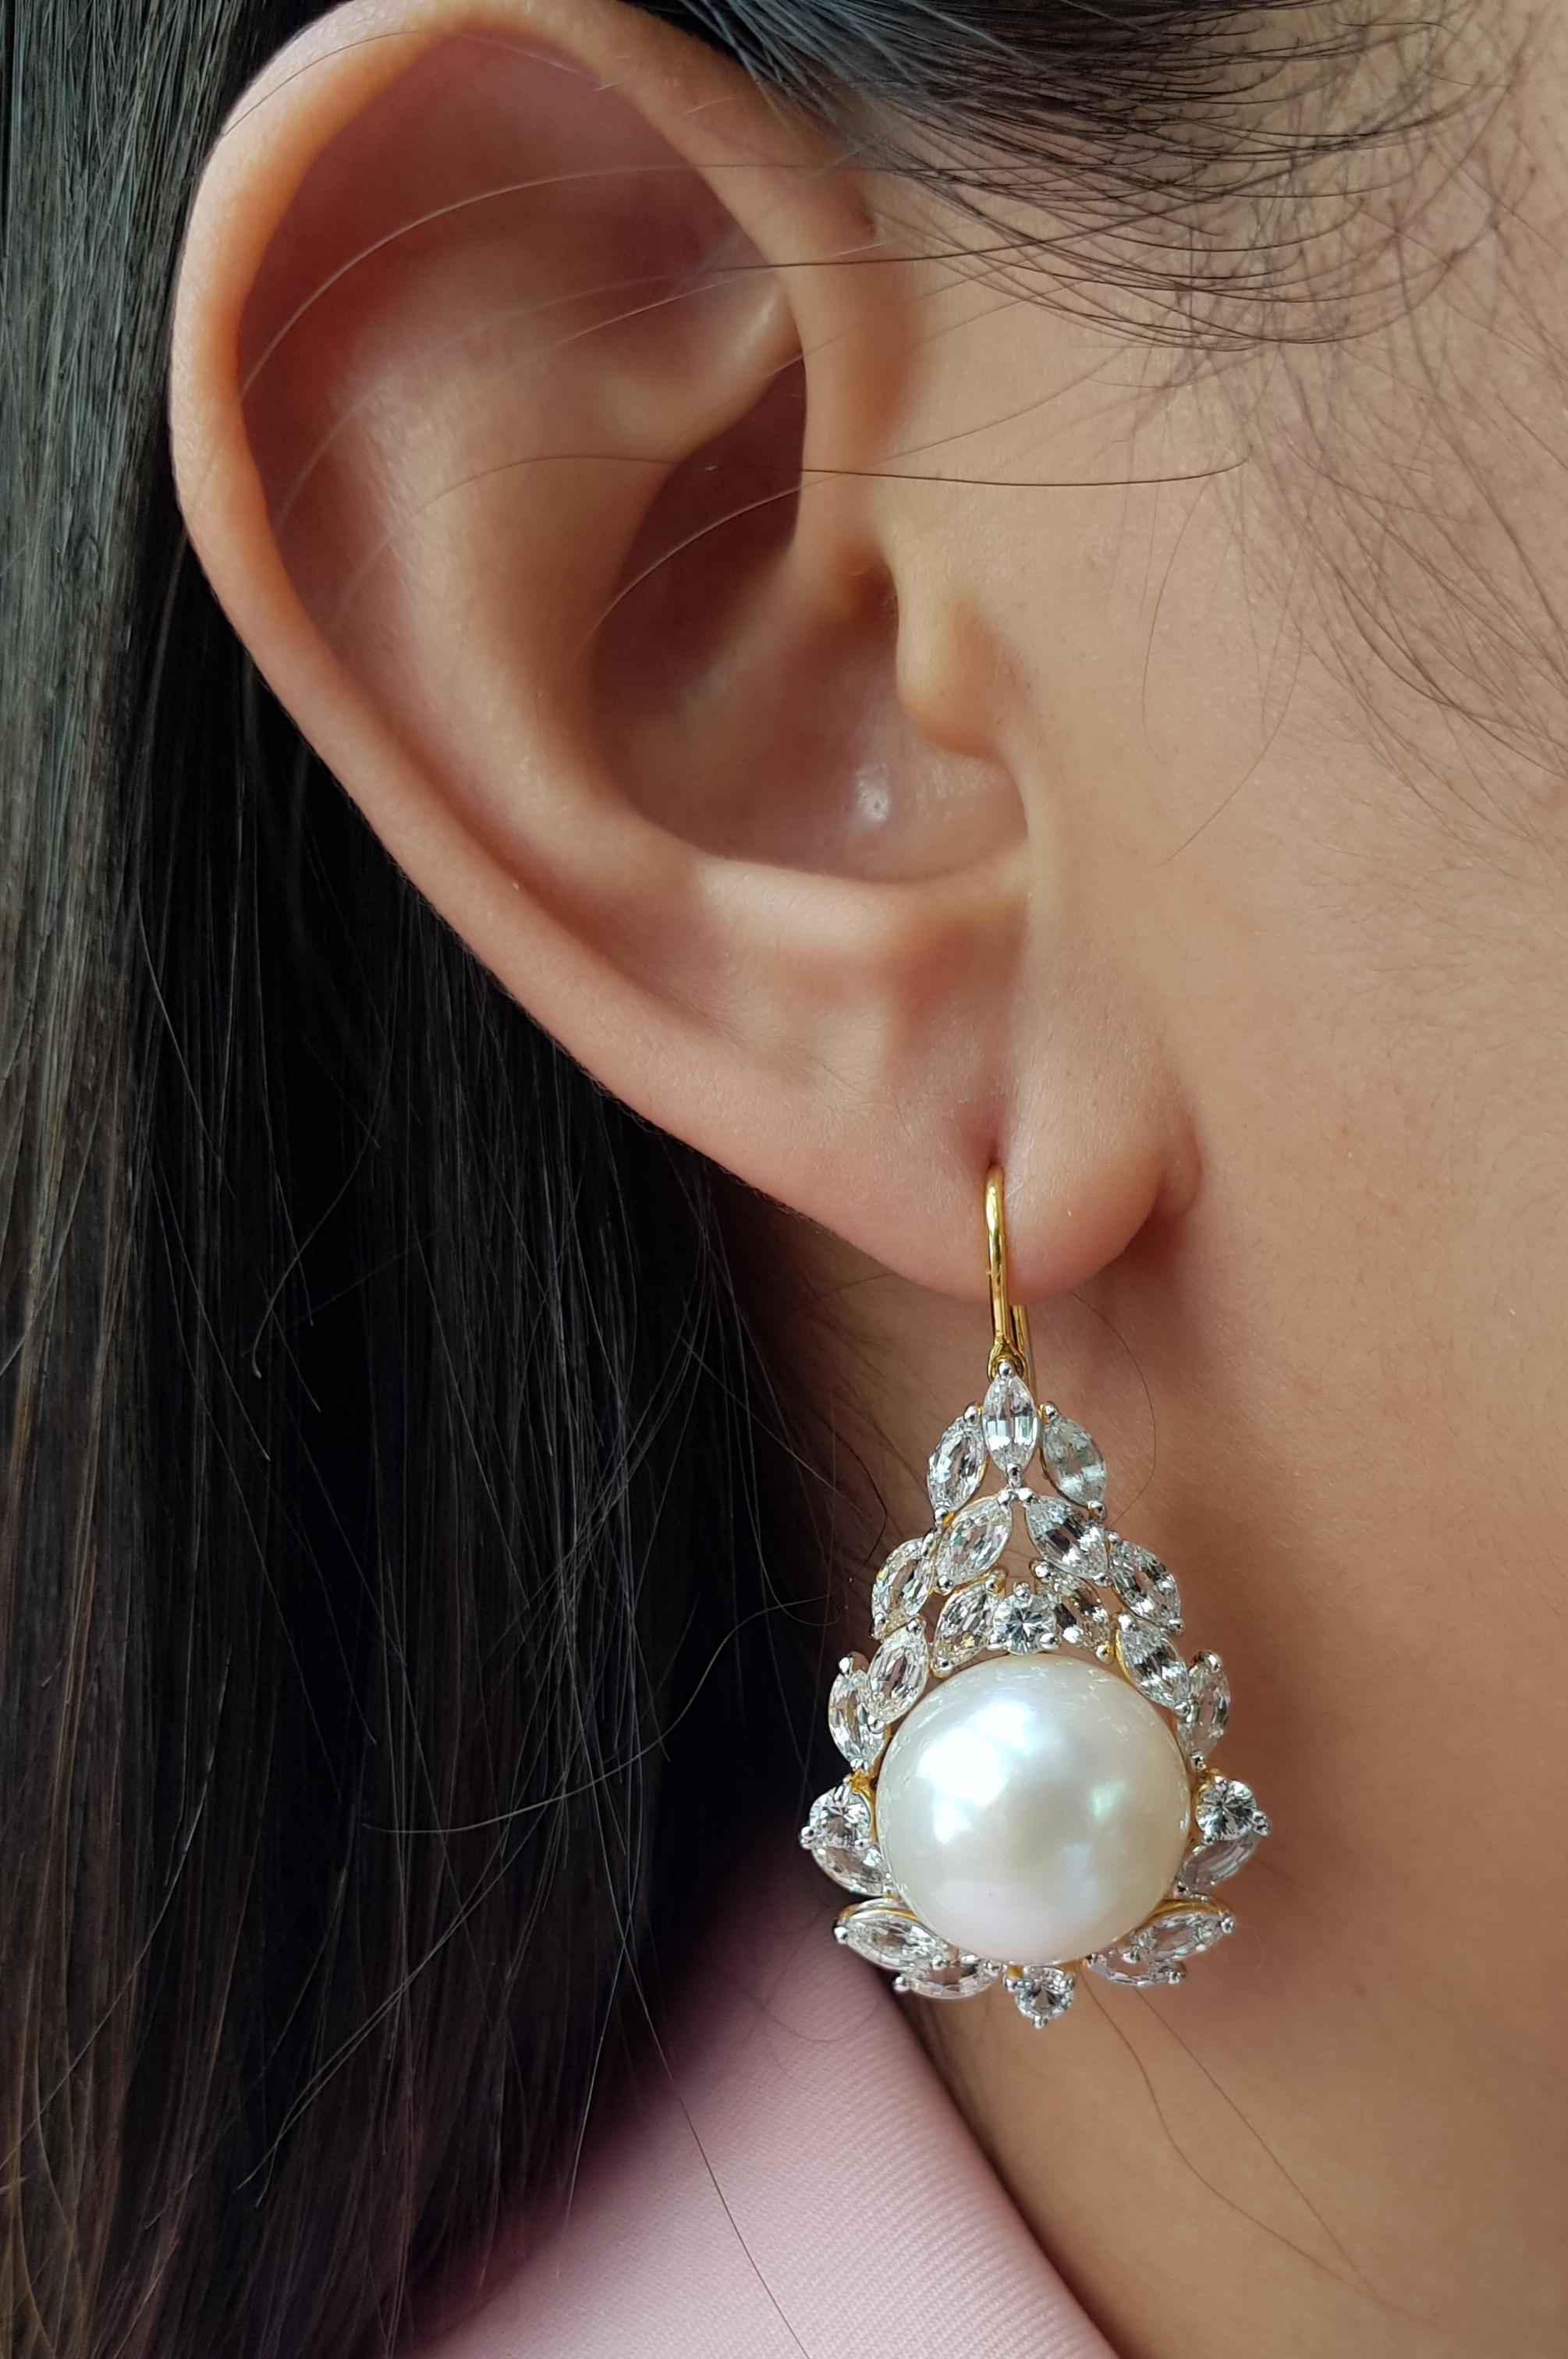 Fresh Water Pearl with White Sapphire 8.53 carats Earring set in 18 Karat Gold Settings

Width: 2.3 cm
Length: 4.0 cm 

